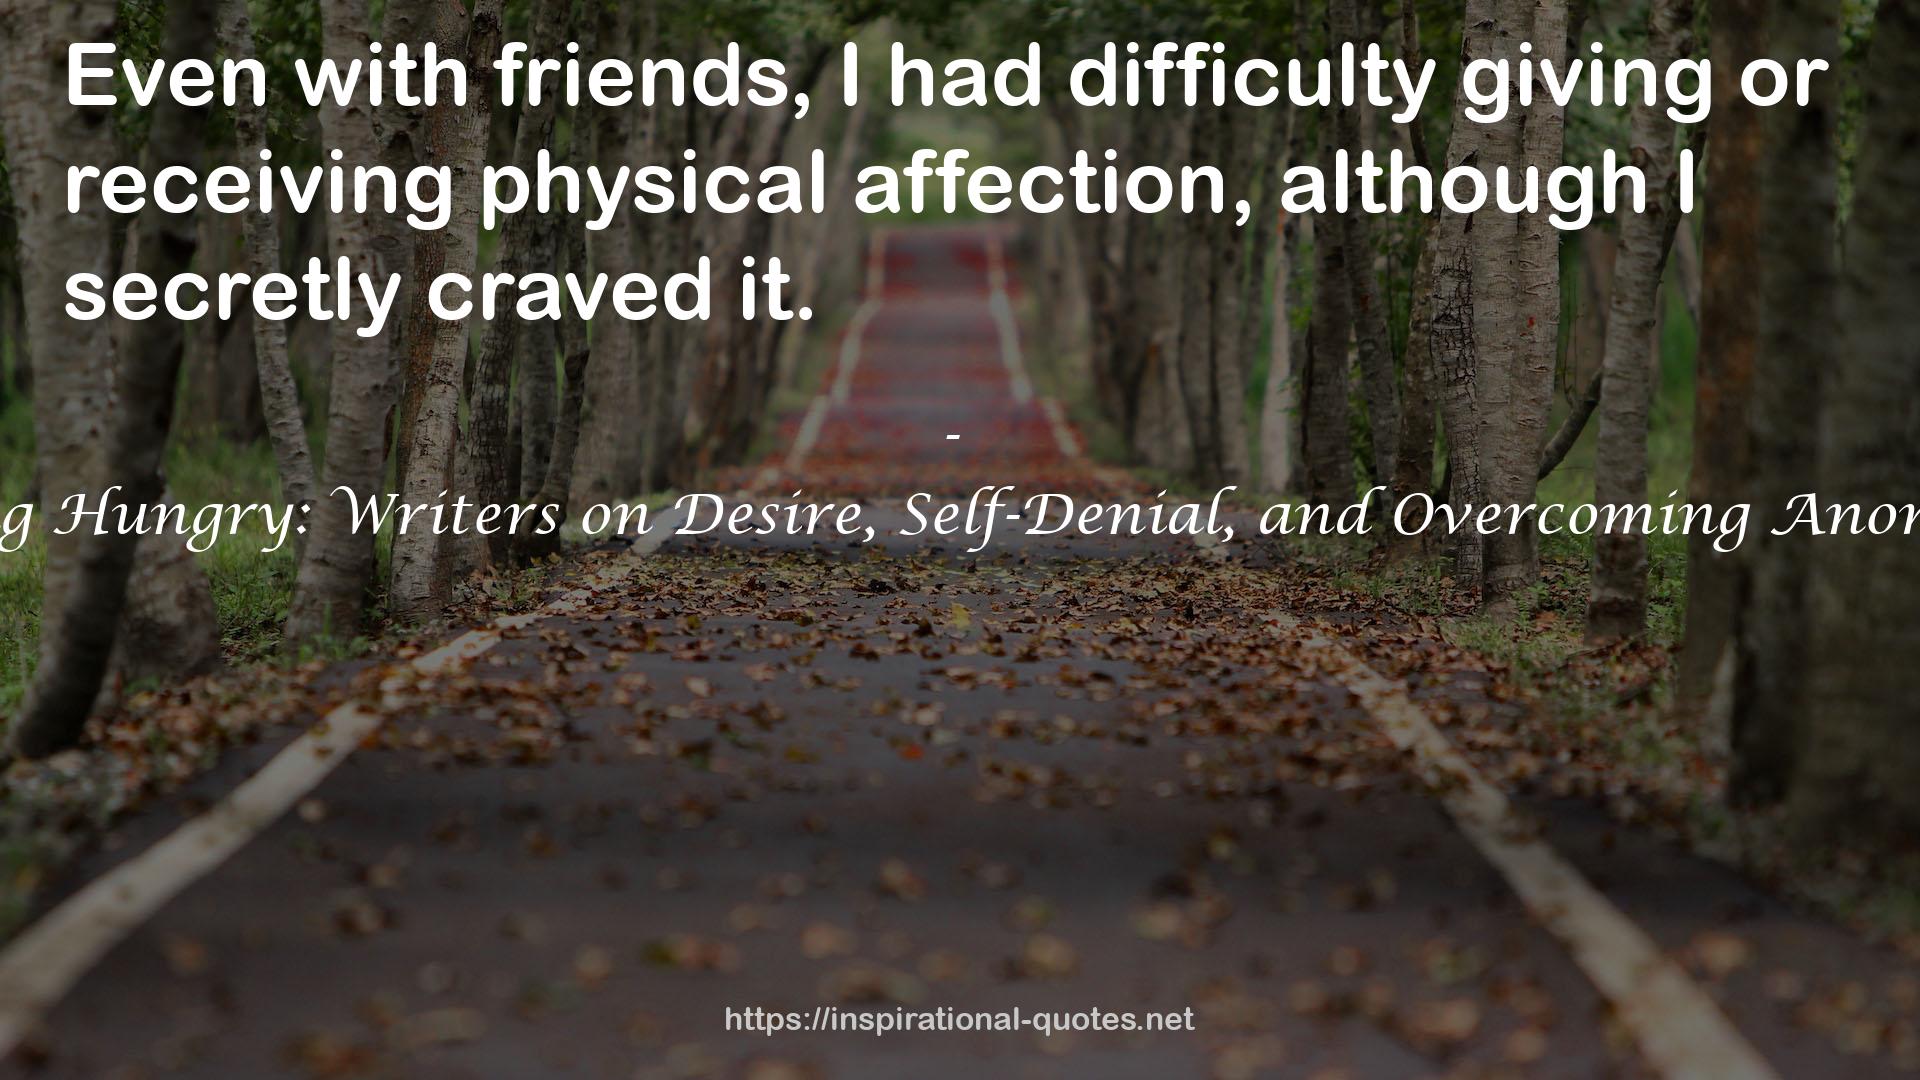 Going Hungry: Writers on Desire, Self-Denial, and Overcoming Anorexia QUOTES